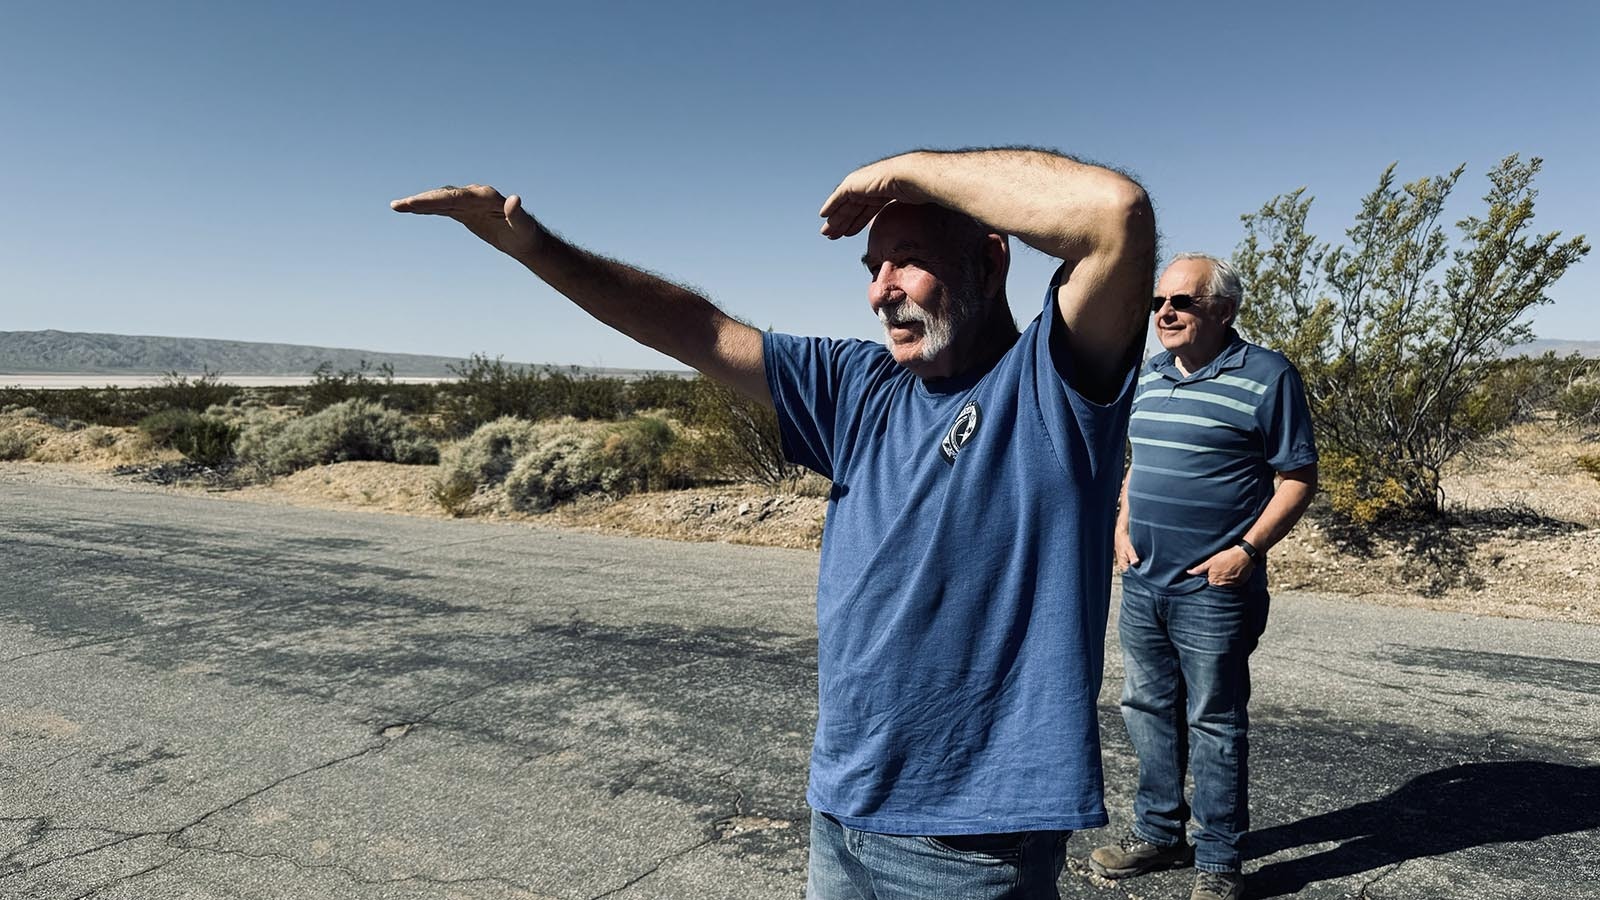 On left, Gregg Wilkerson and Larry Vredenberg, geologists who are retired from the Bureau of Land Management, look out over the Mojave Desert where Dyno Nobel stores hopper cars filled with ammonium nitrate. Wilkerson was trying to see a spot where trees were growing many miles in the distance but was blinded by the very bright sun.